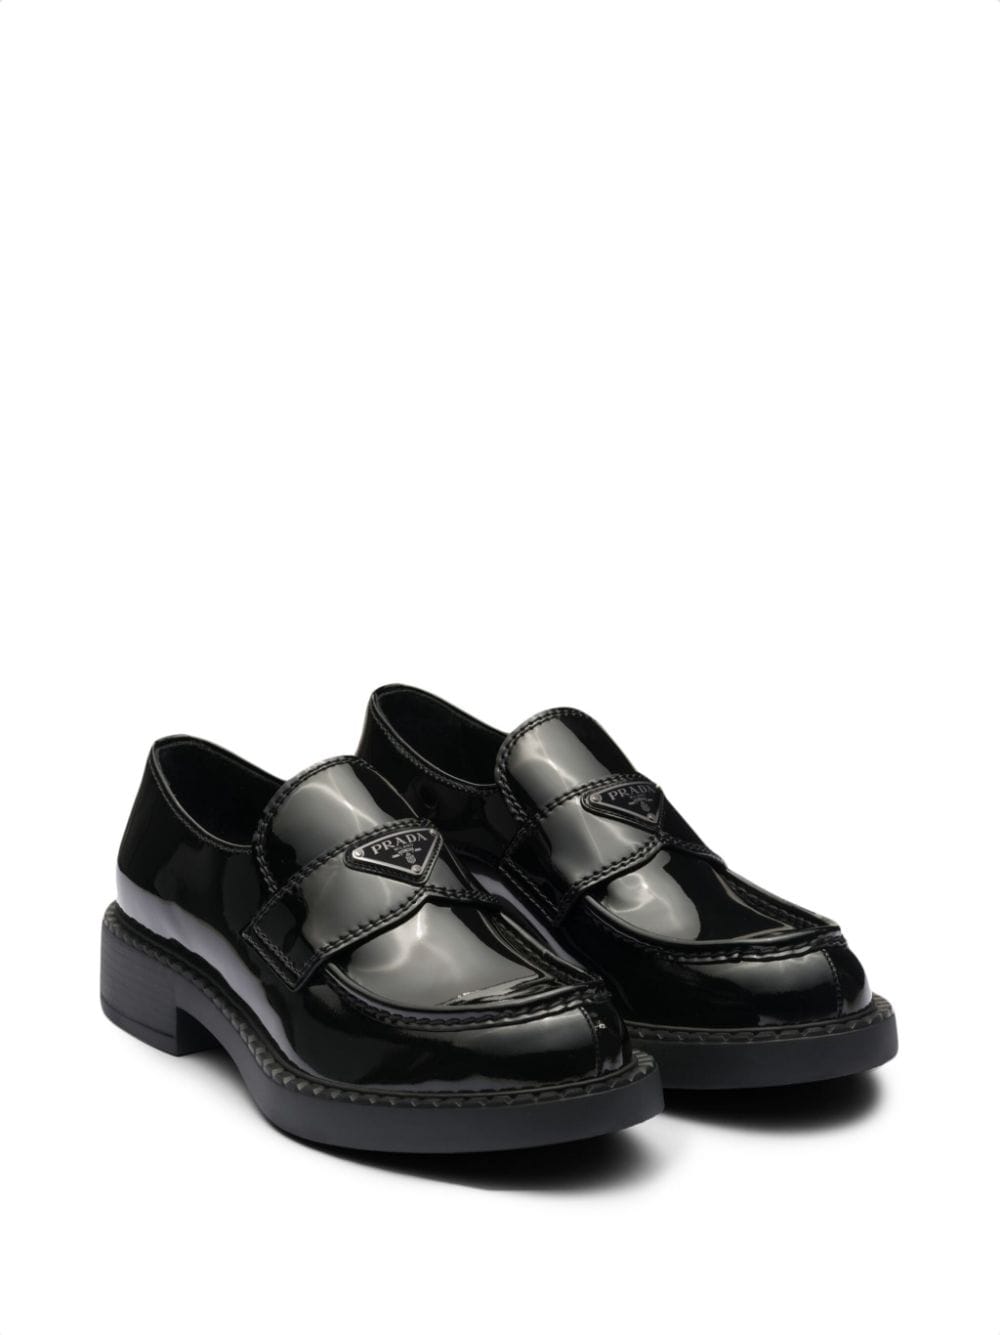 patent leather loafers-2